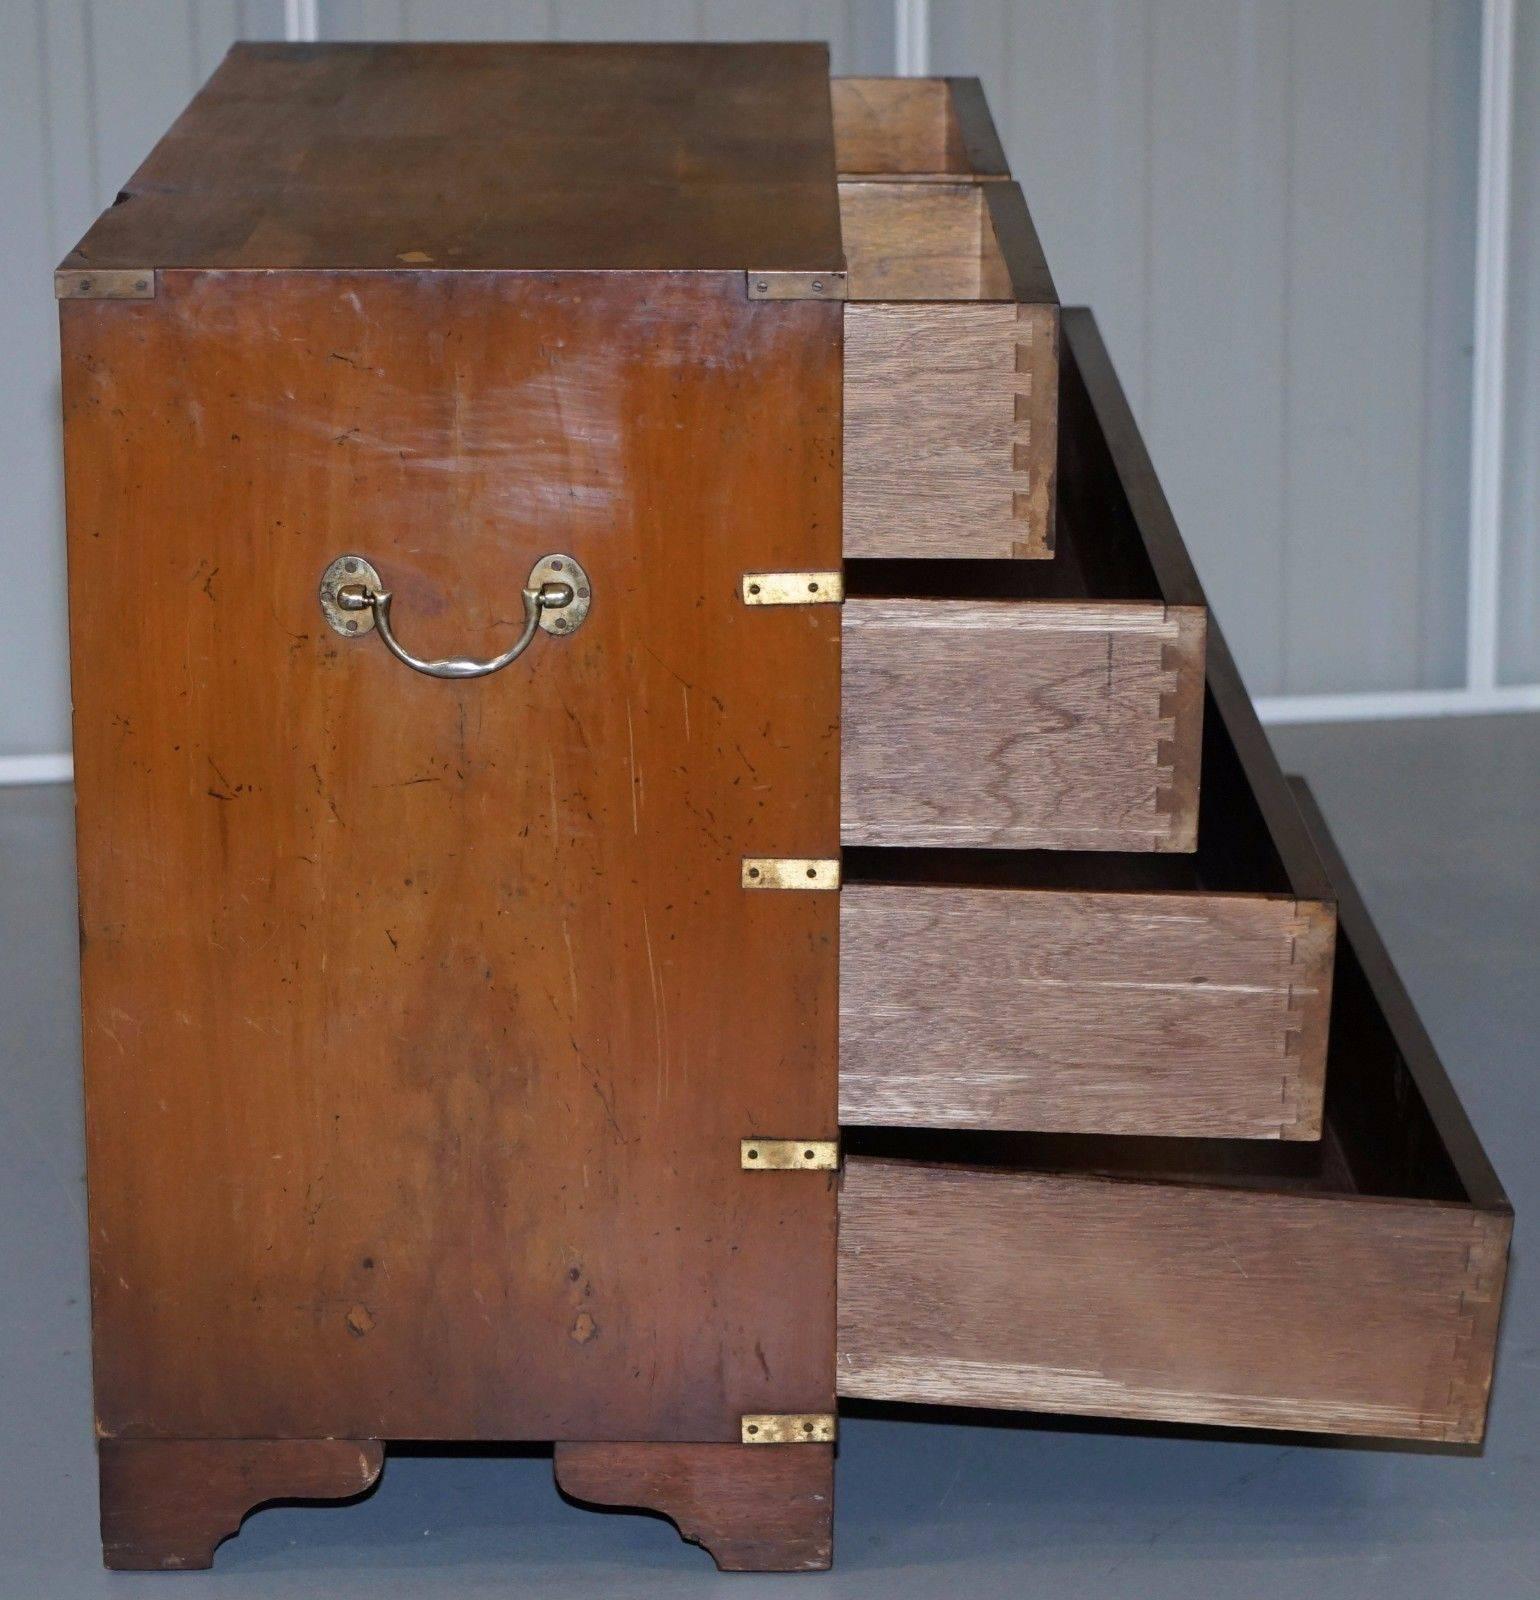 20th Century Yew Wood Veneer Military Campaign Chest of Drawers with Brass Fittings & Handles